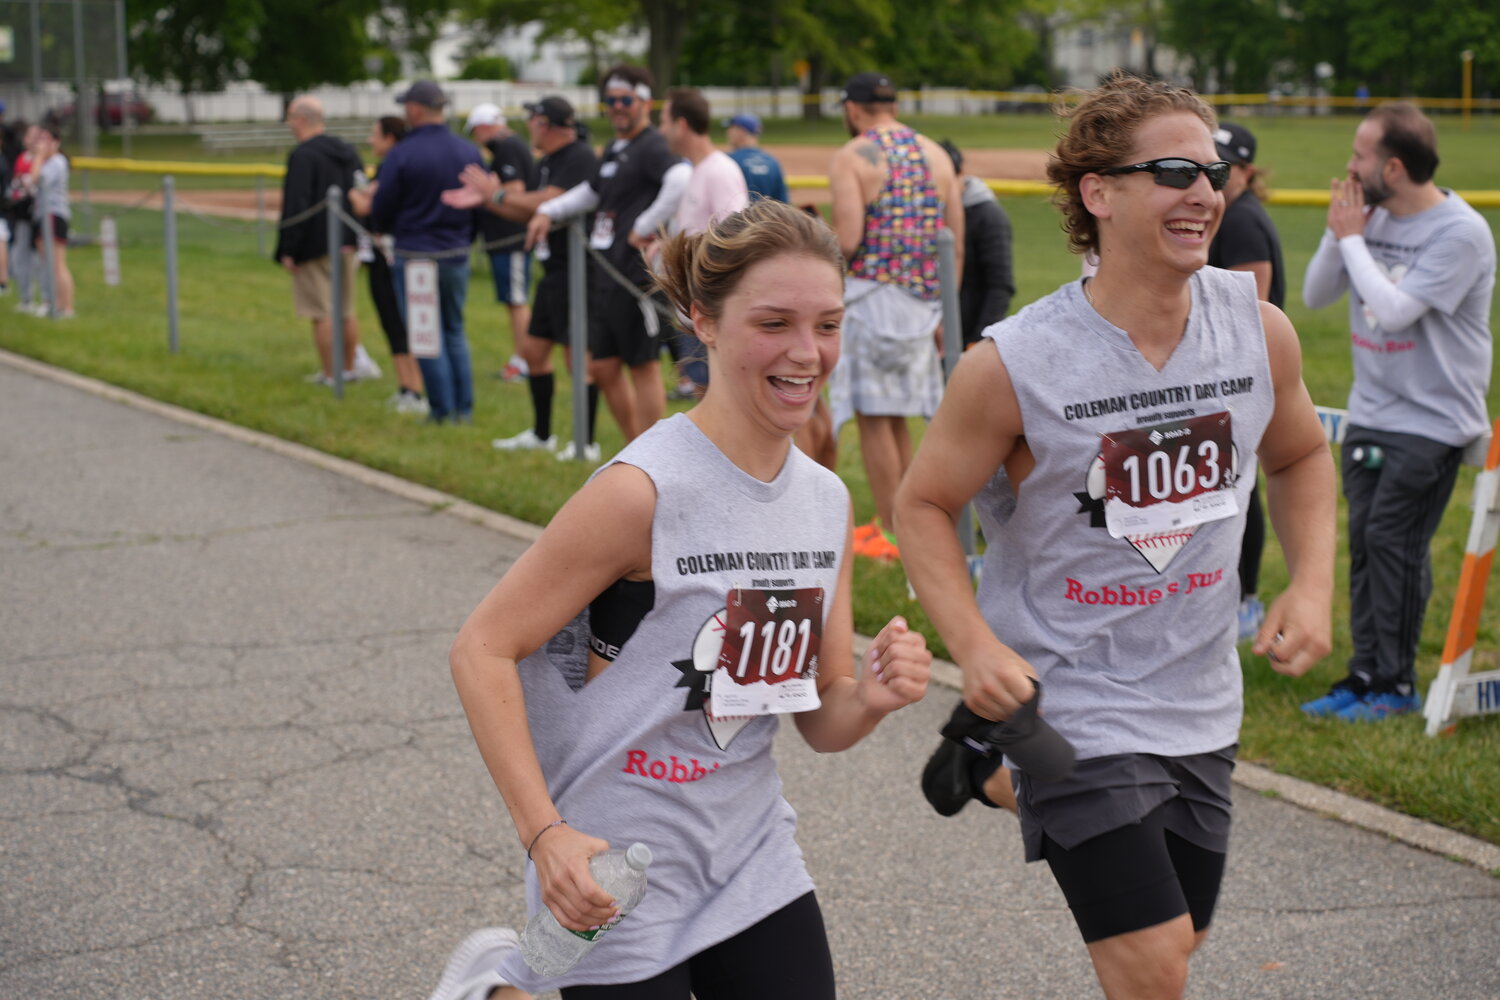 Emma Razukiewicz and Ryan Friedman, far left, crossed the finish line together at the 16th Annual Robbie’s Run, which finished at Lakeside School in Merrick.